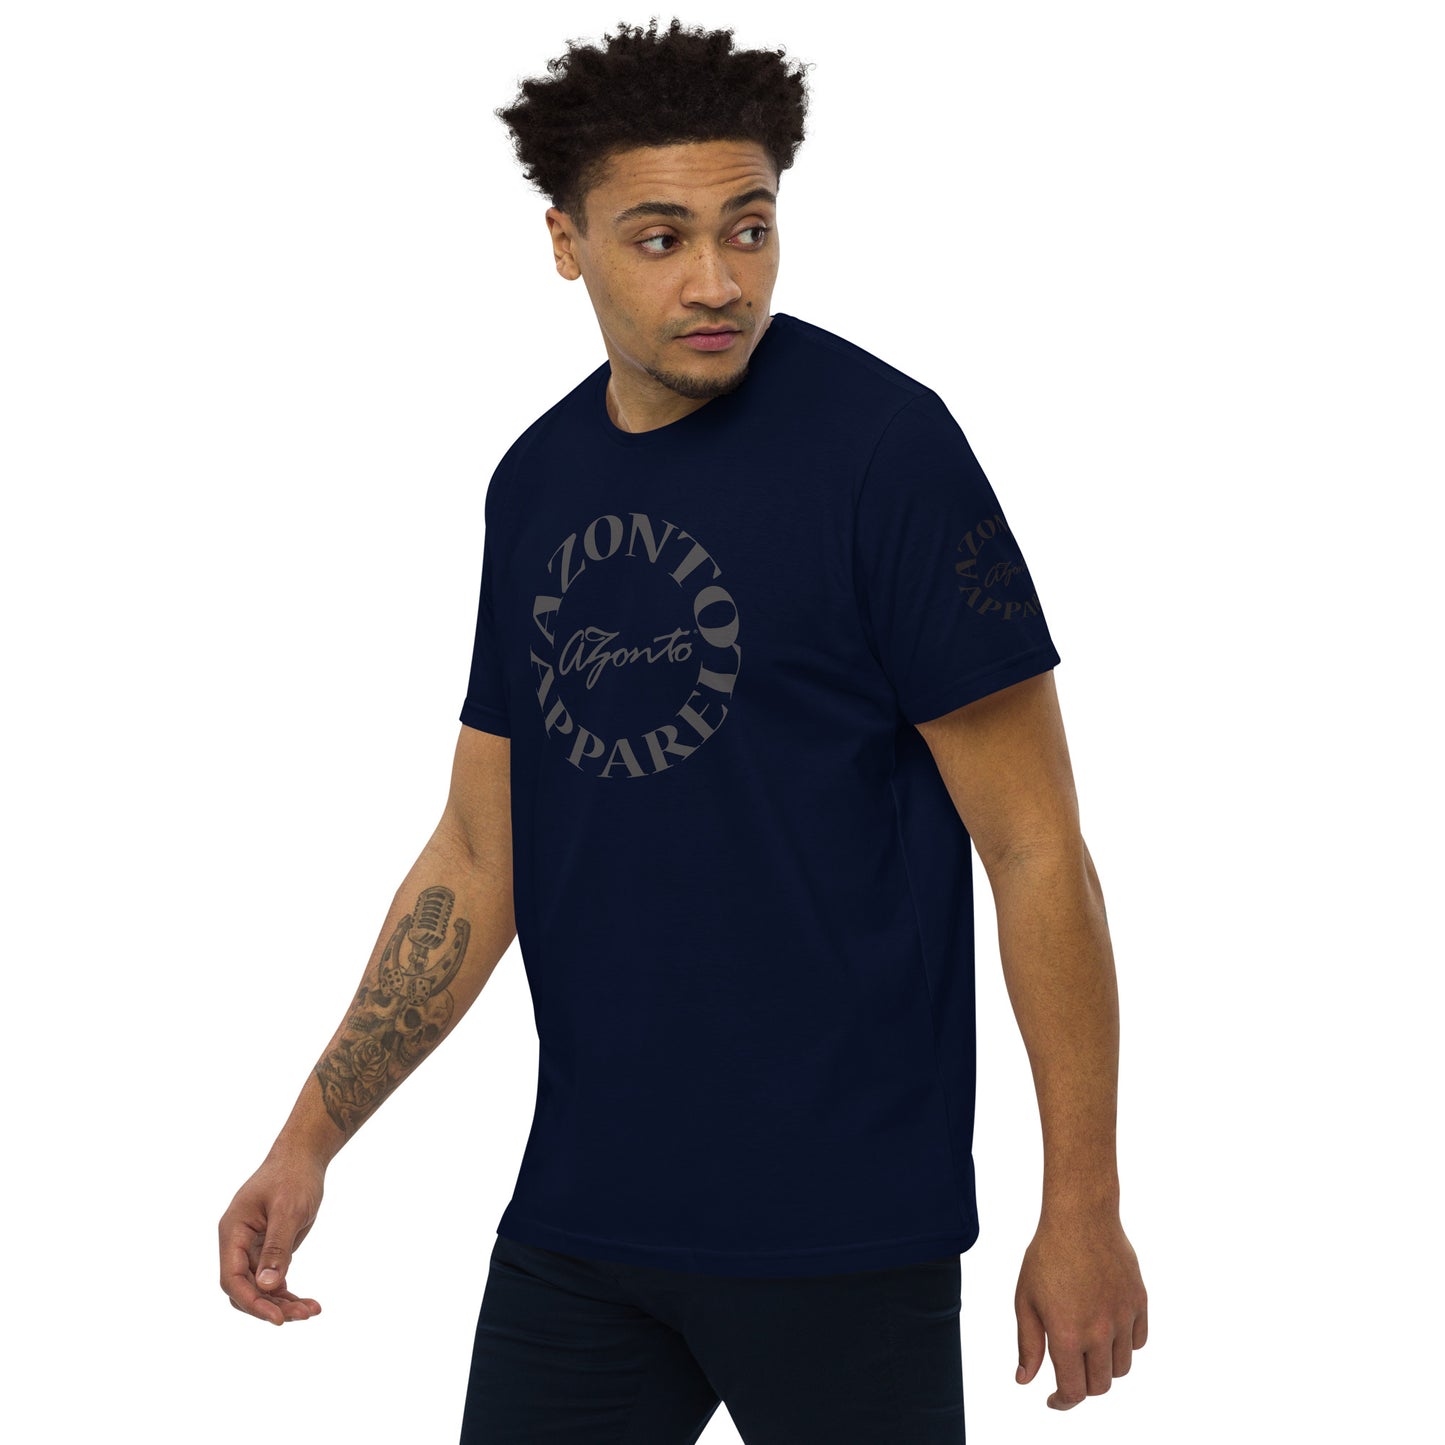 AZONTO Men's fitted straight cut t-shirt